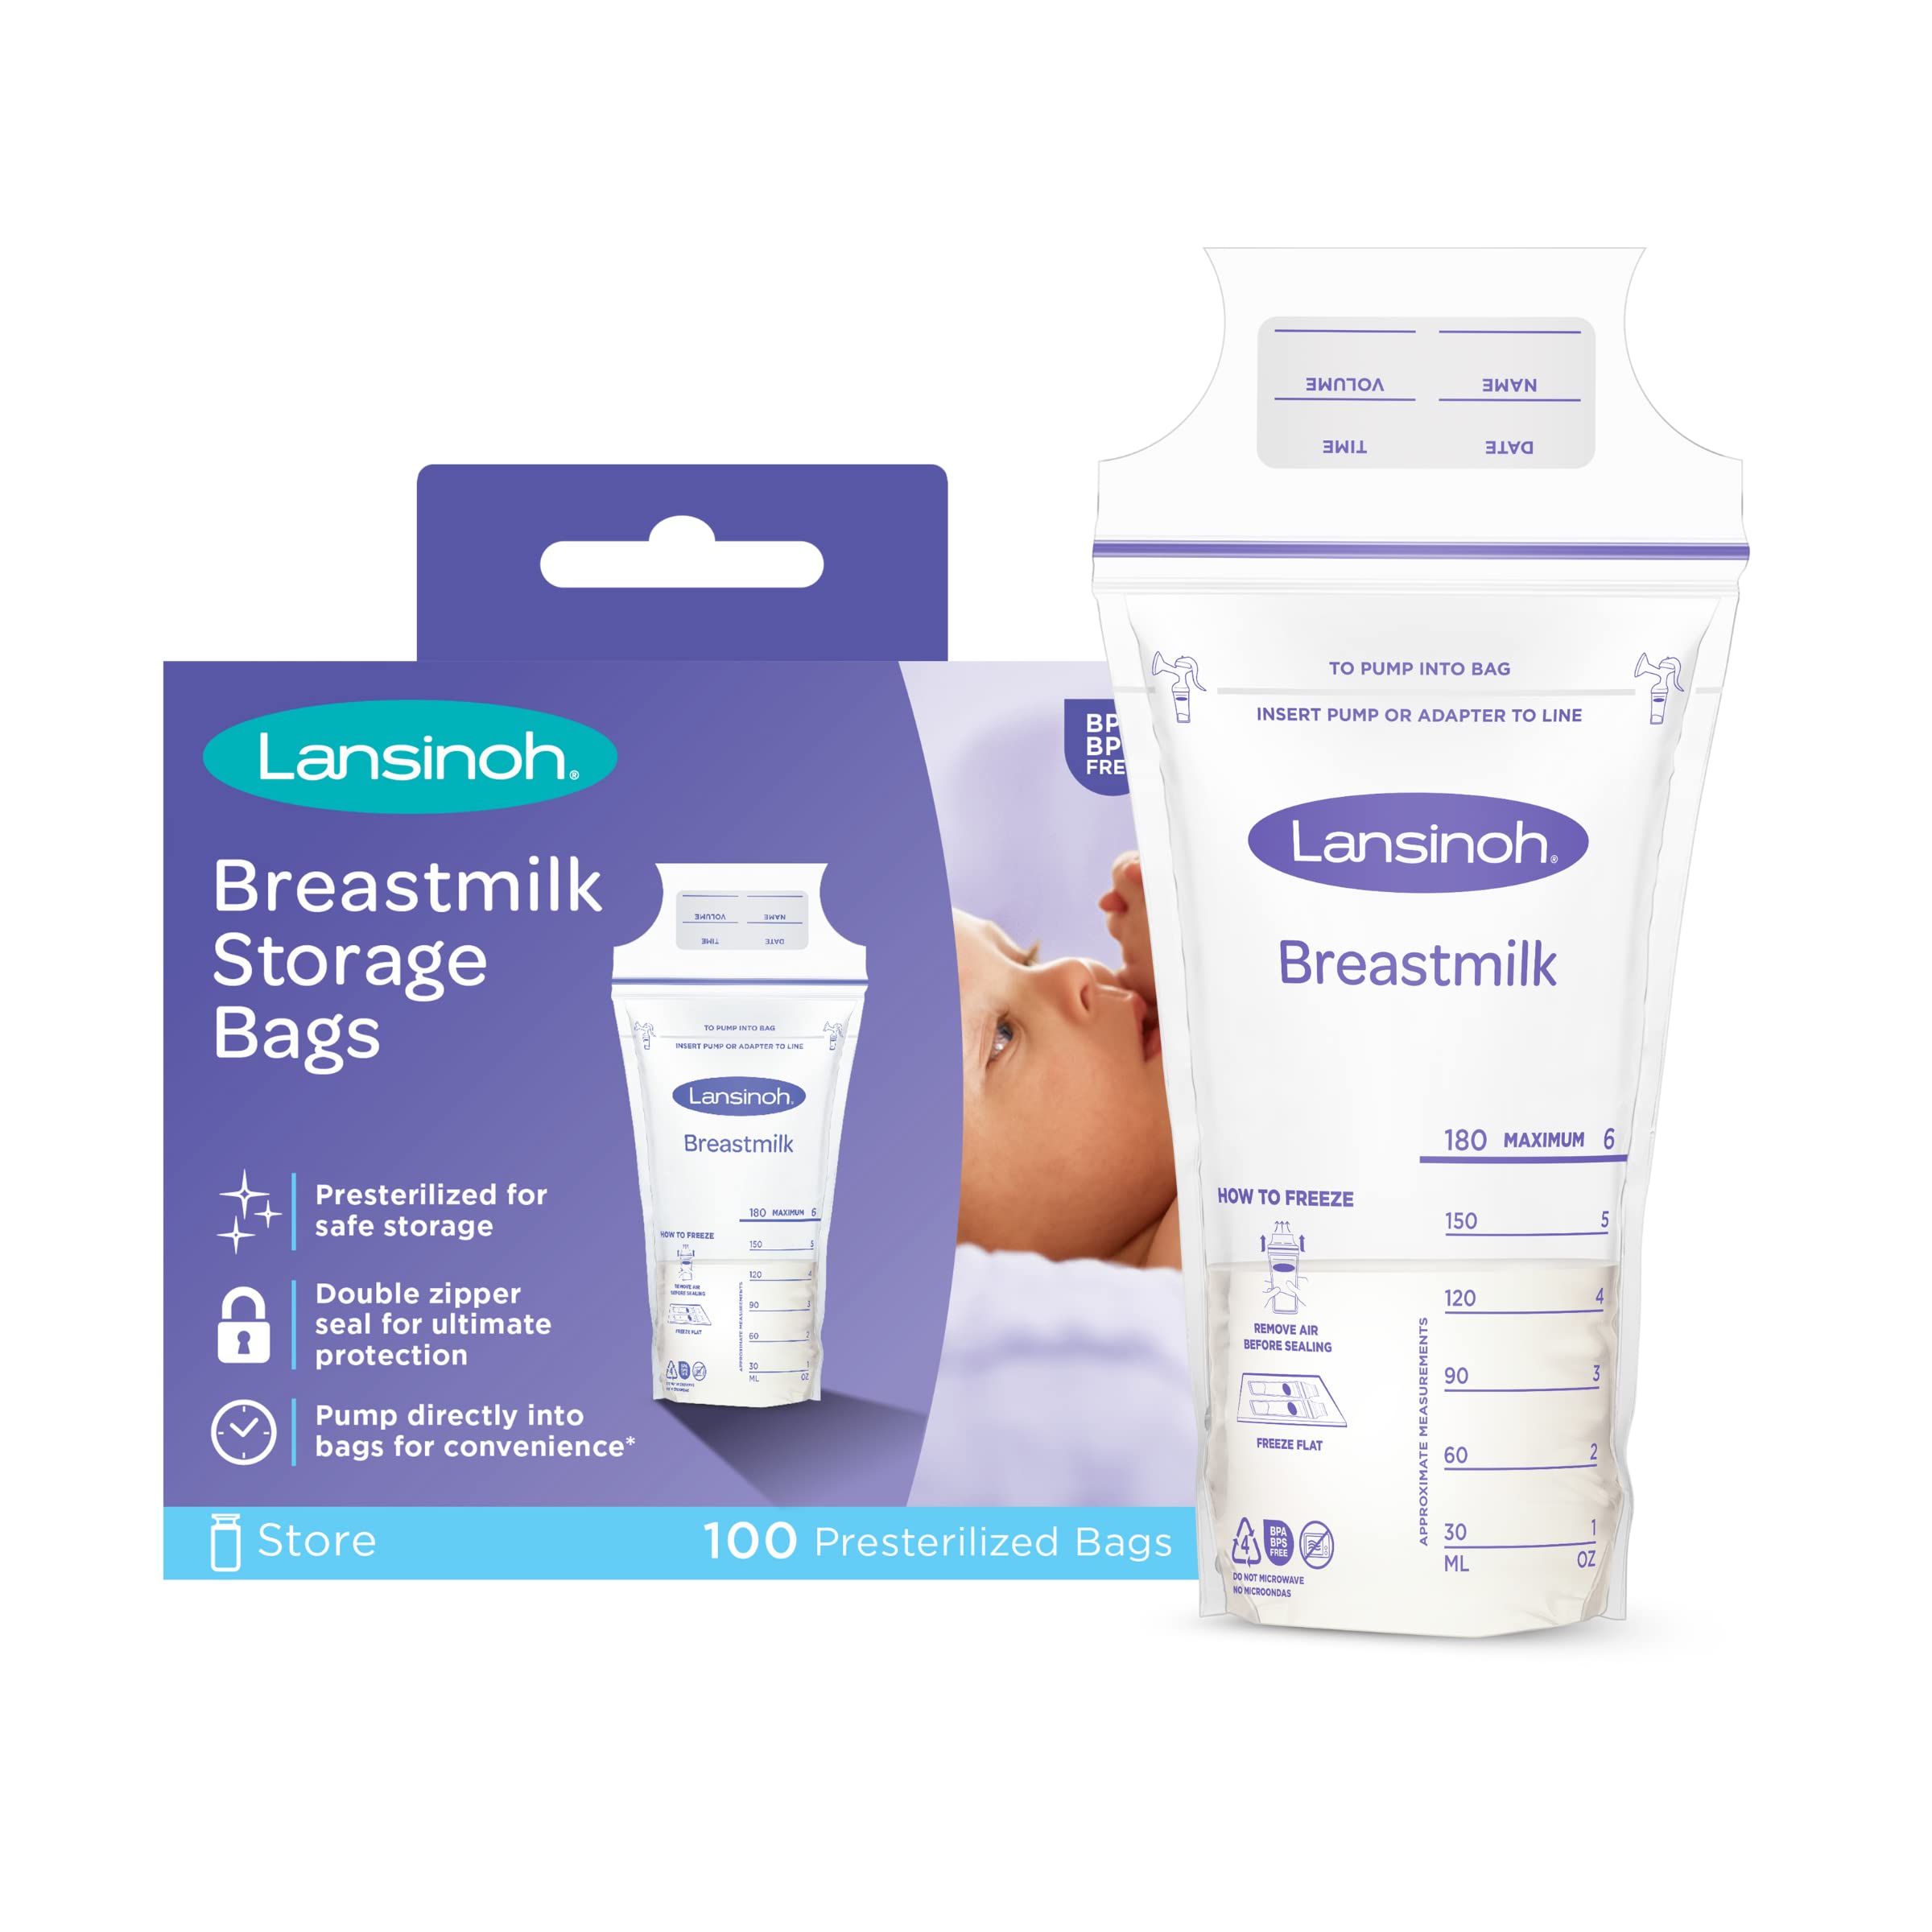 Book Cover Lansinoh Breastmilk Storage Bags, 100 Count, 6 Ounce, Easy to Use Milk Storage Bags for Breastfeeding, Presterilized, Hygienically Doubled-Sealed, for Refrigeration and Freezing 6 Ounce 100.0